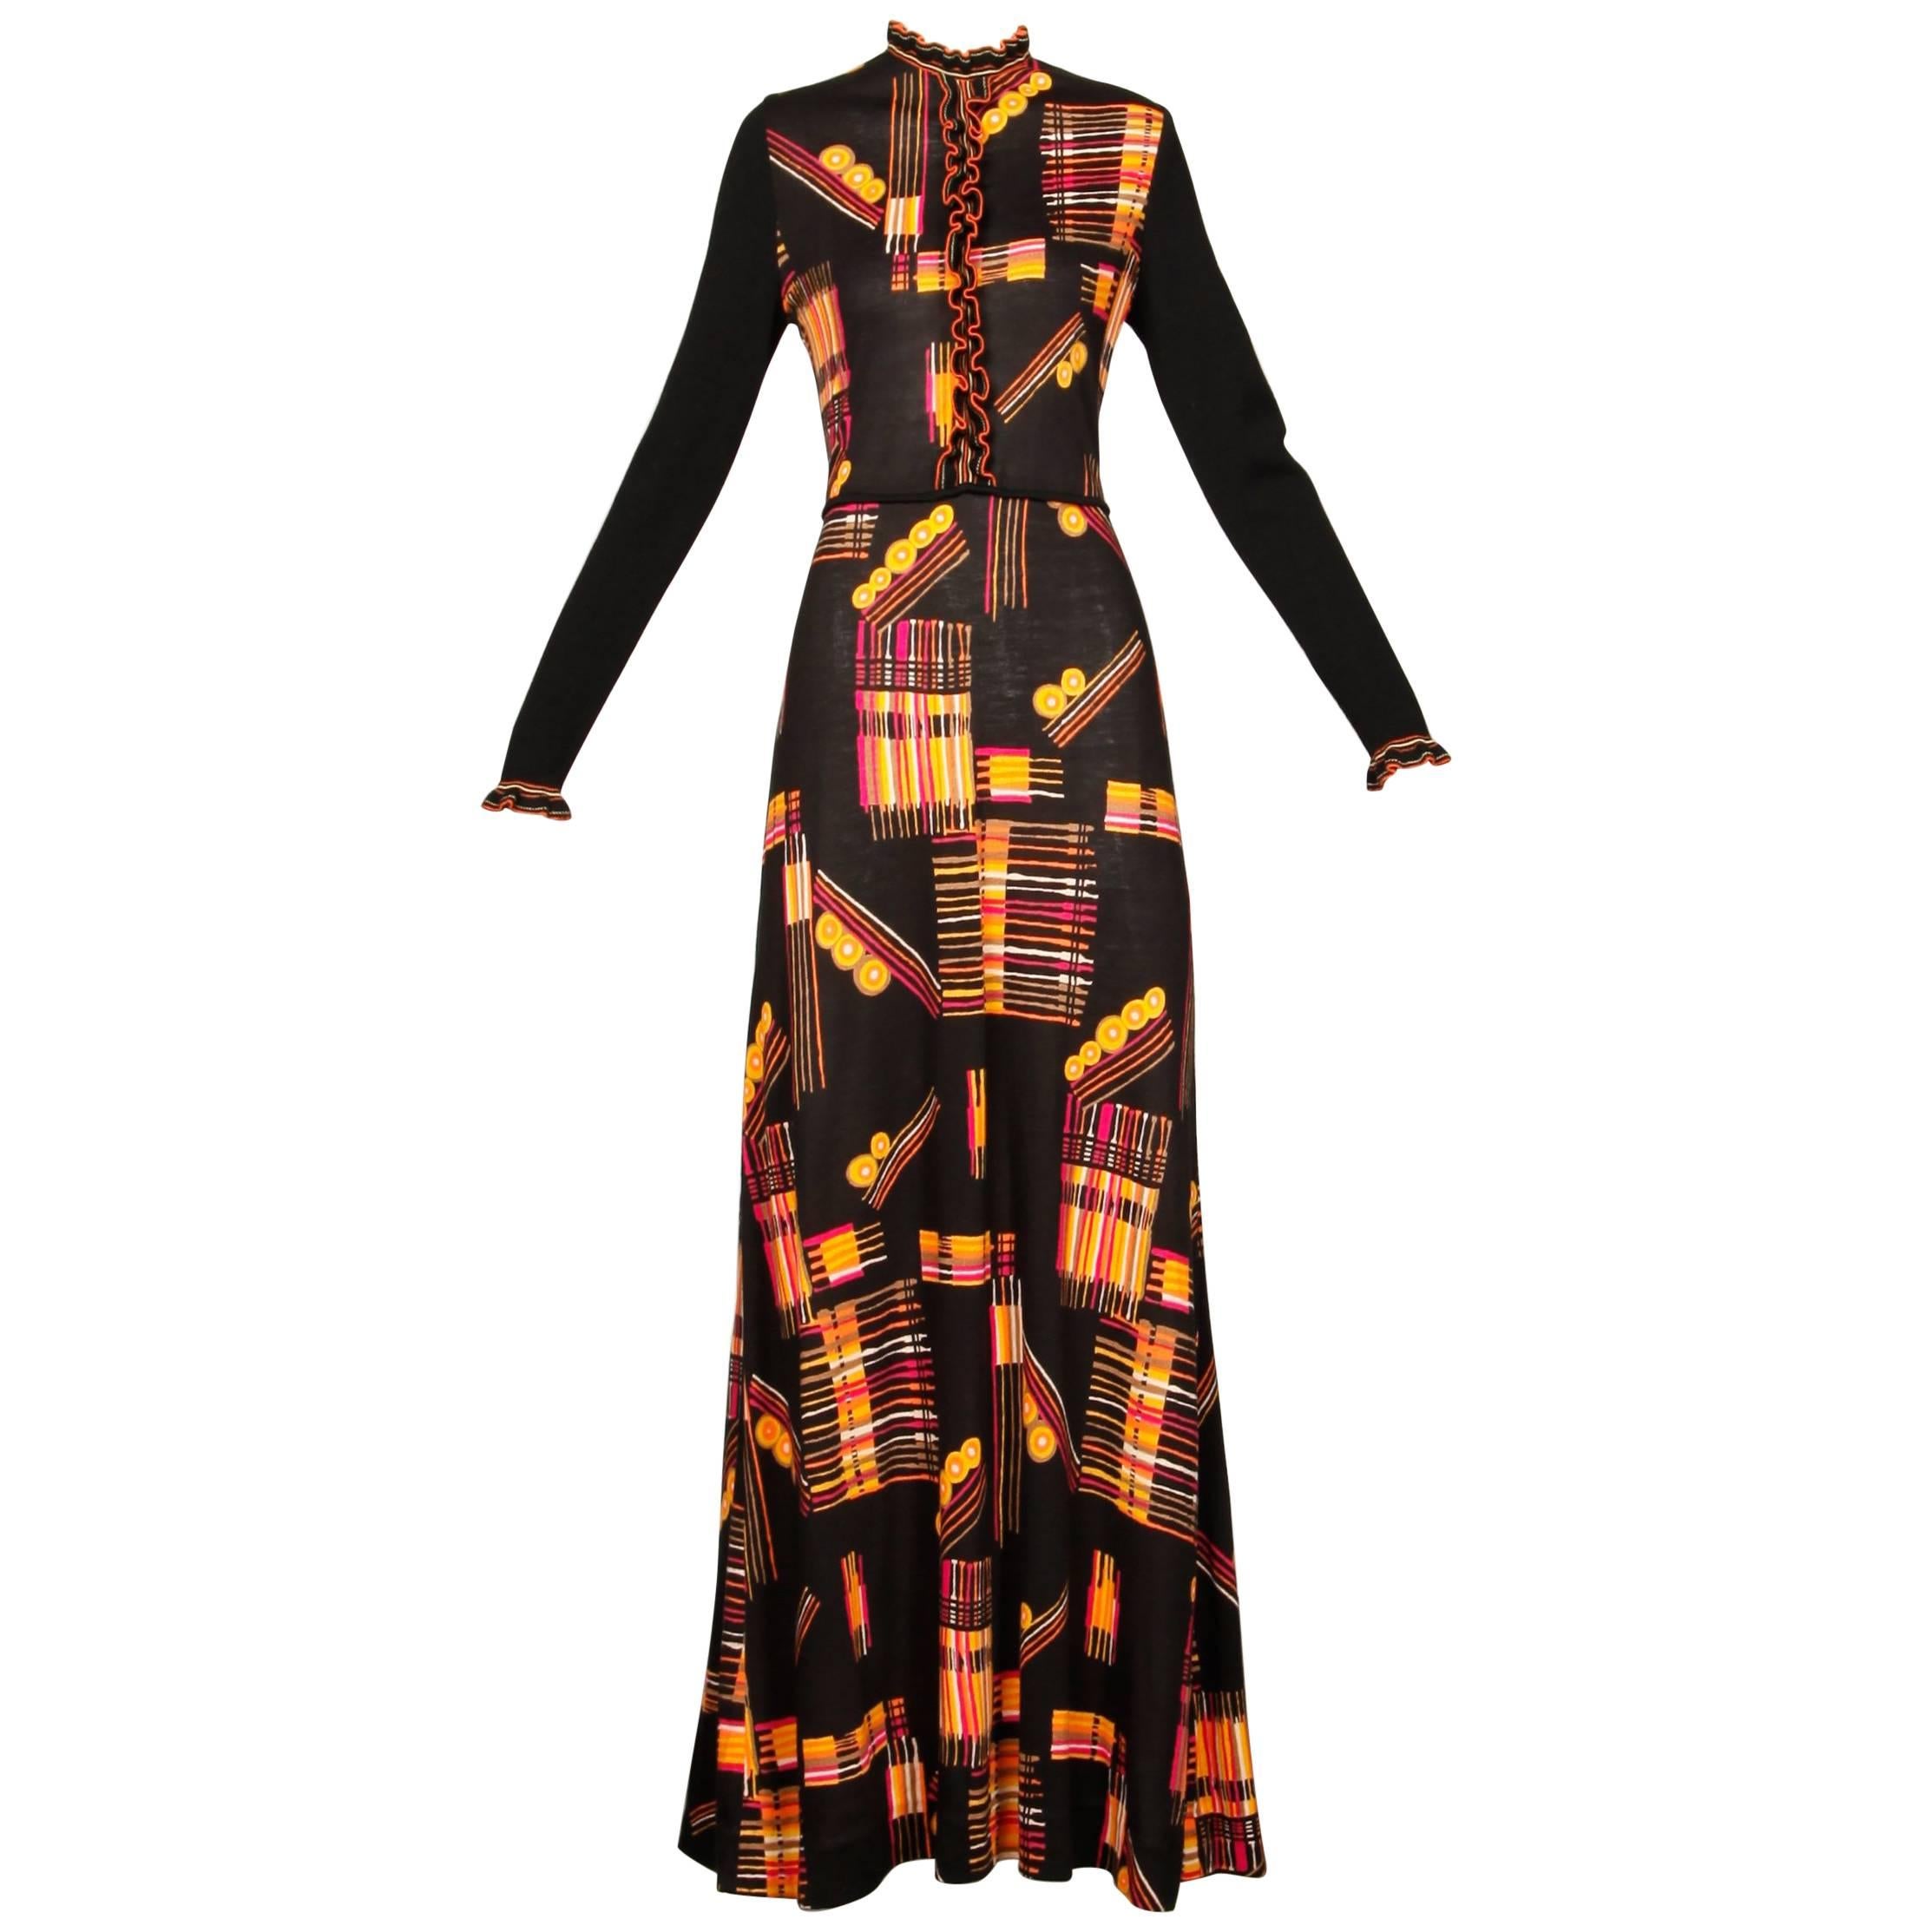 1970s Vintage 100% Wool Knit Maxi Dress with Vibrant Mid-Century Print